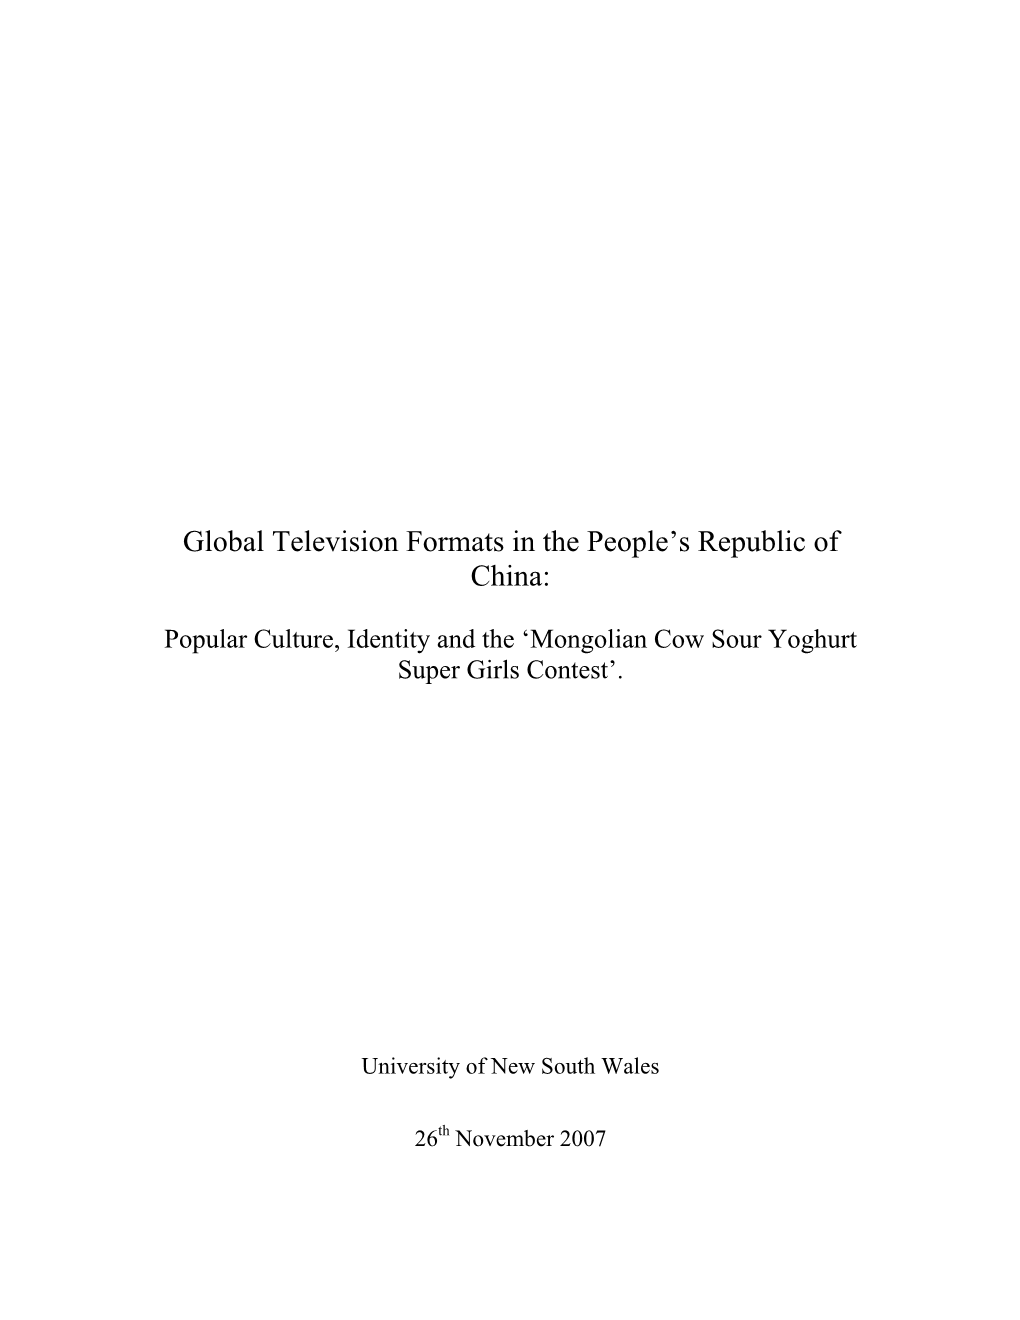 Global Television Formats in the People's Republic of China